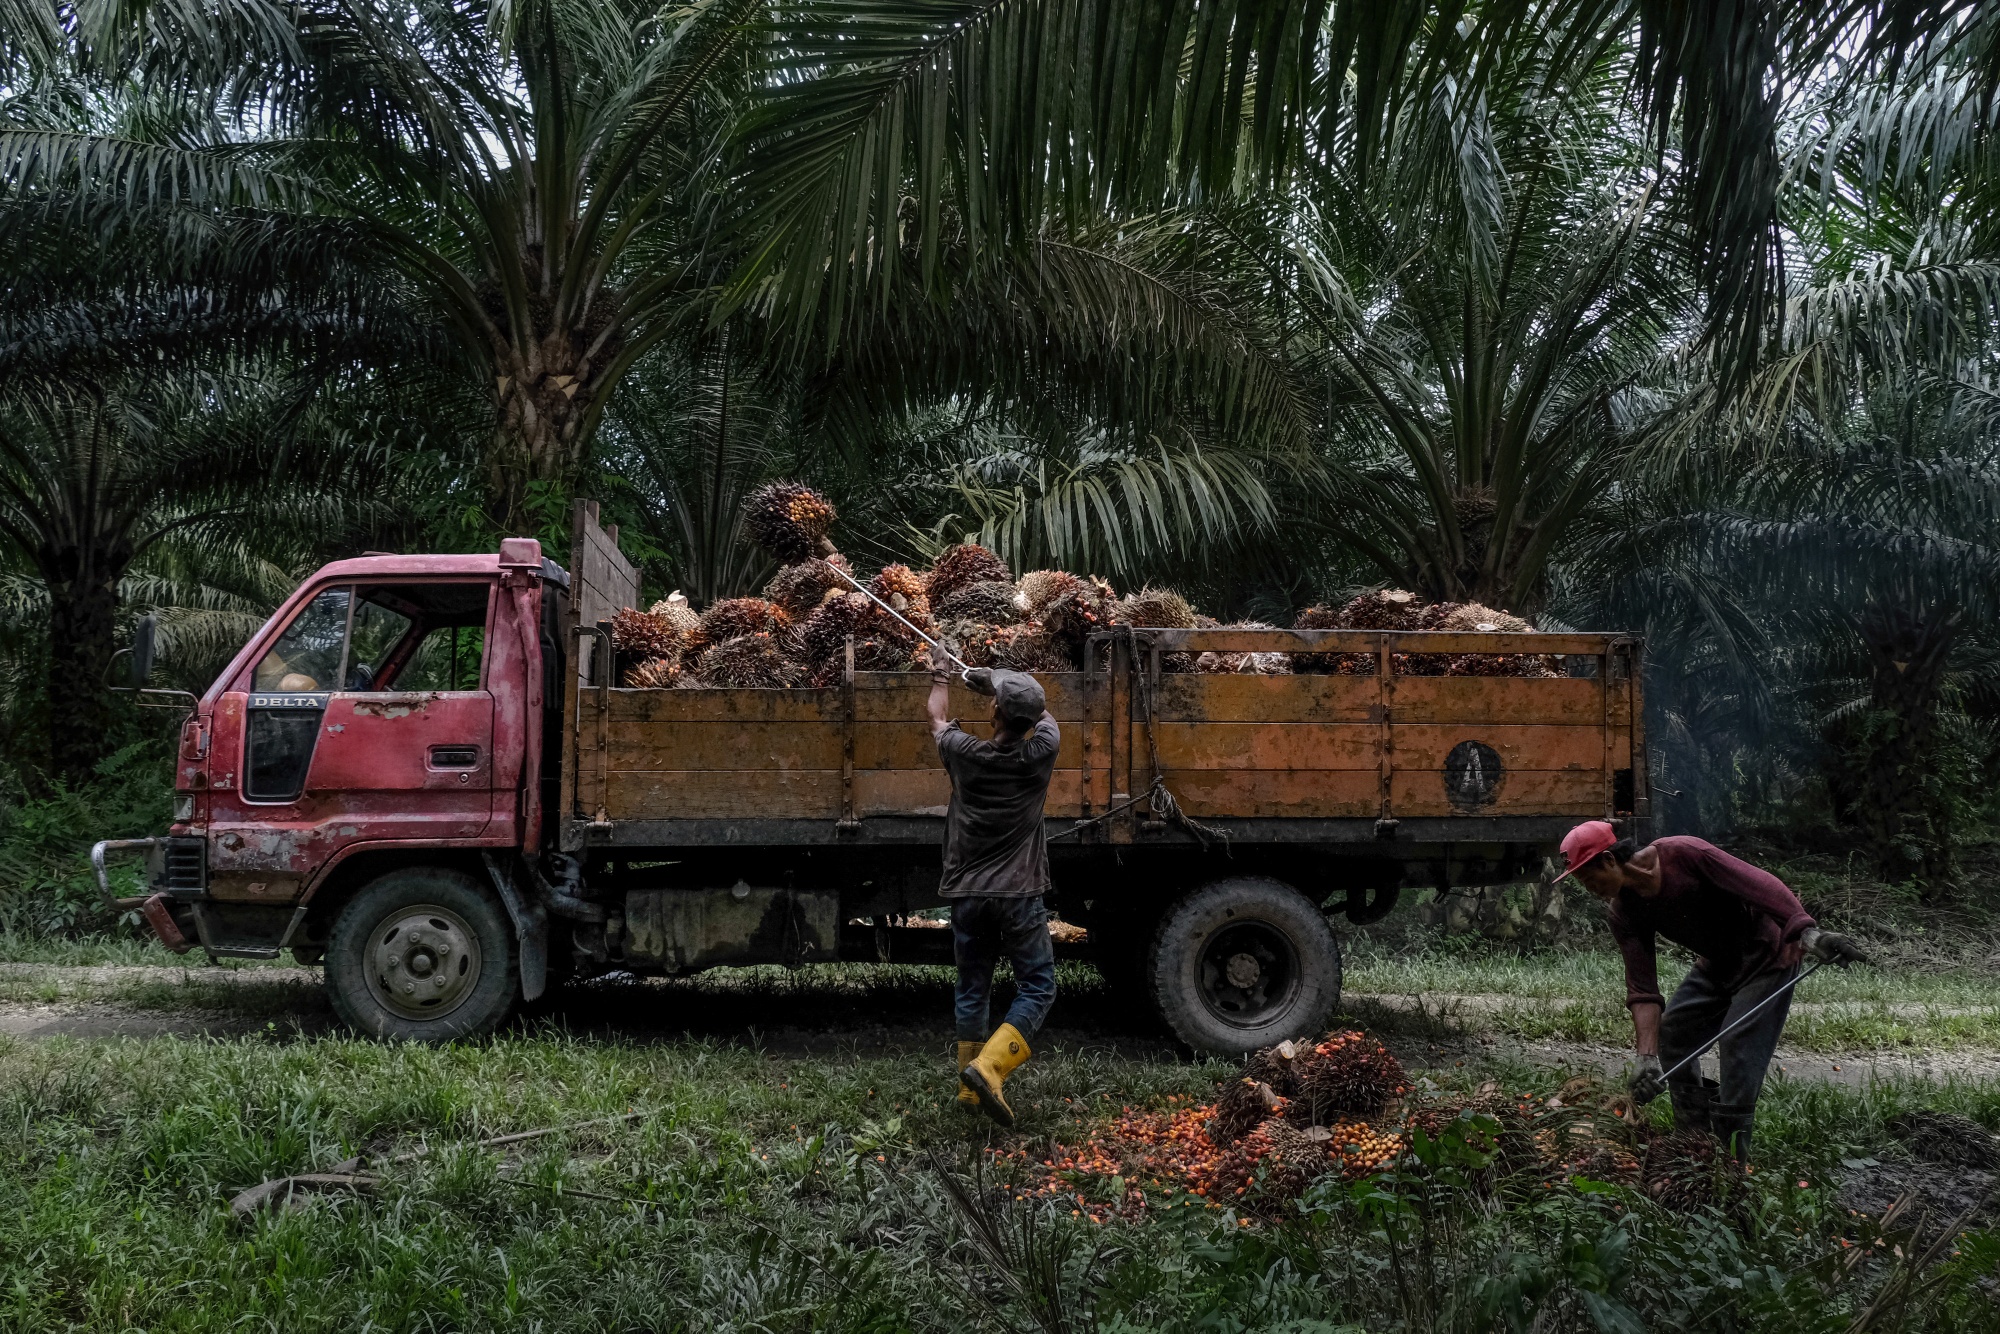 Oil palm trees require a steady diet of nutrients and minerals. Malnourished trees produce less, which leads to lower oil extraction rates.